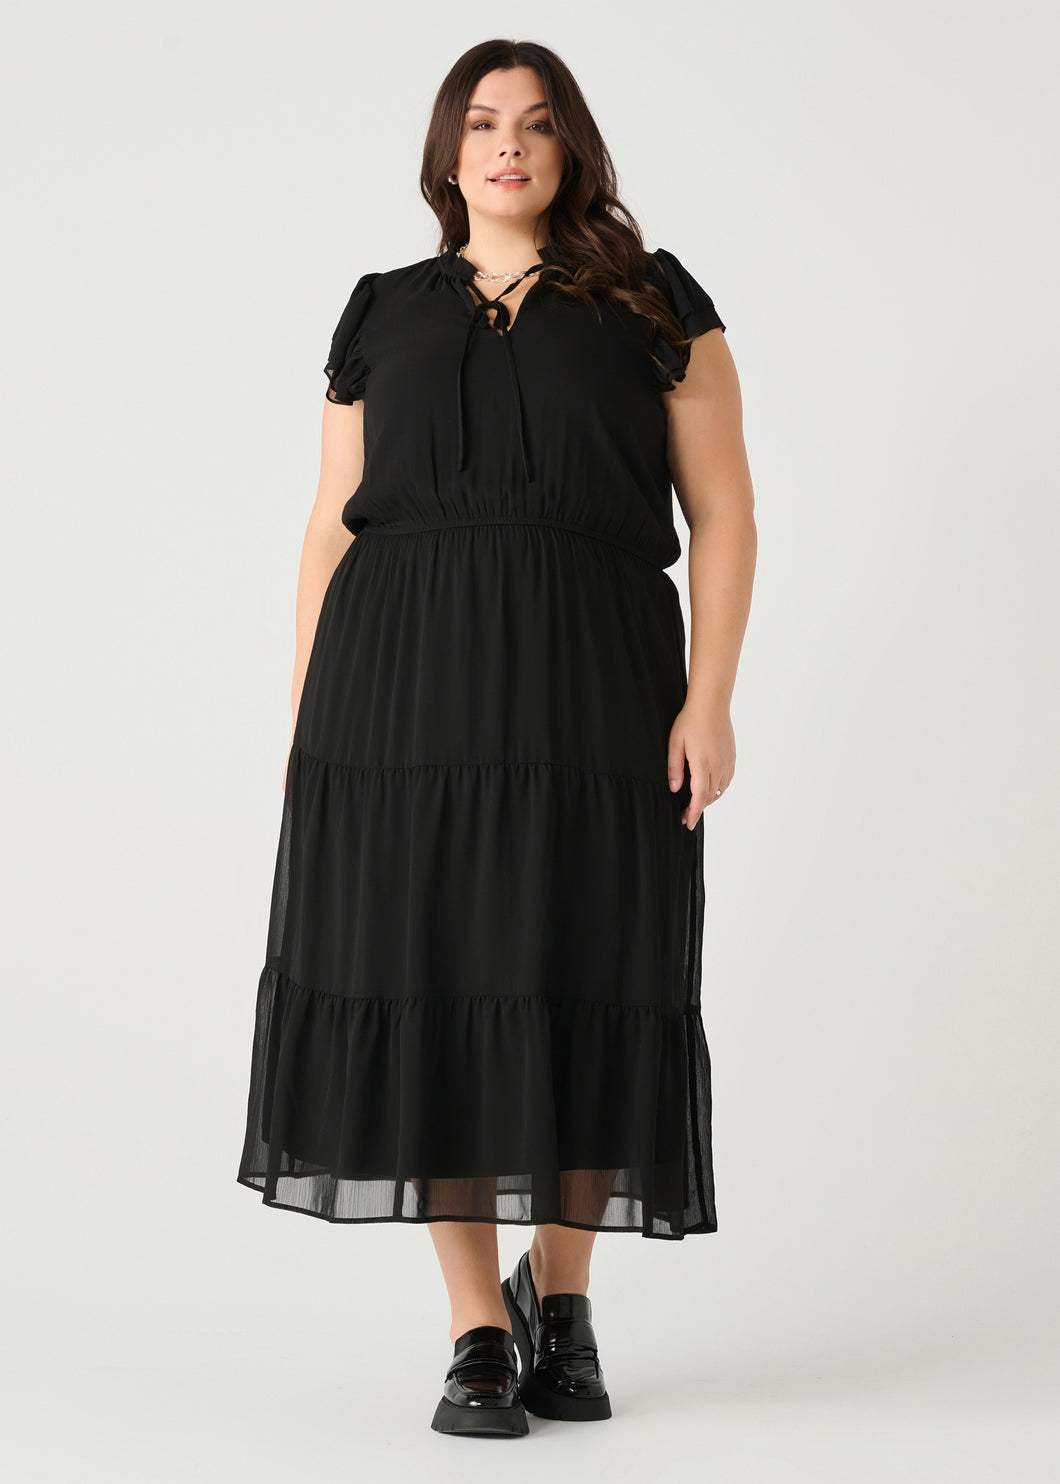 RUFFLED SLEEVE TIERED MAXI DRESS by Dex (available in plus sizes)